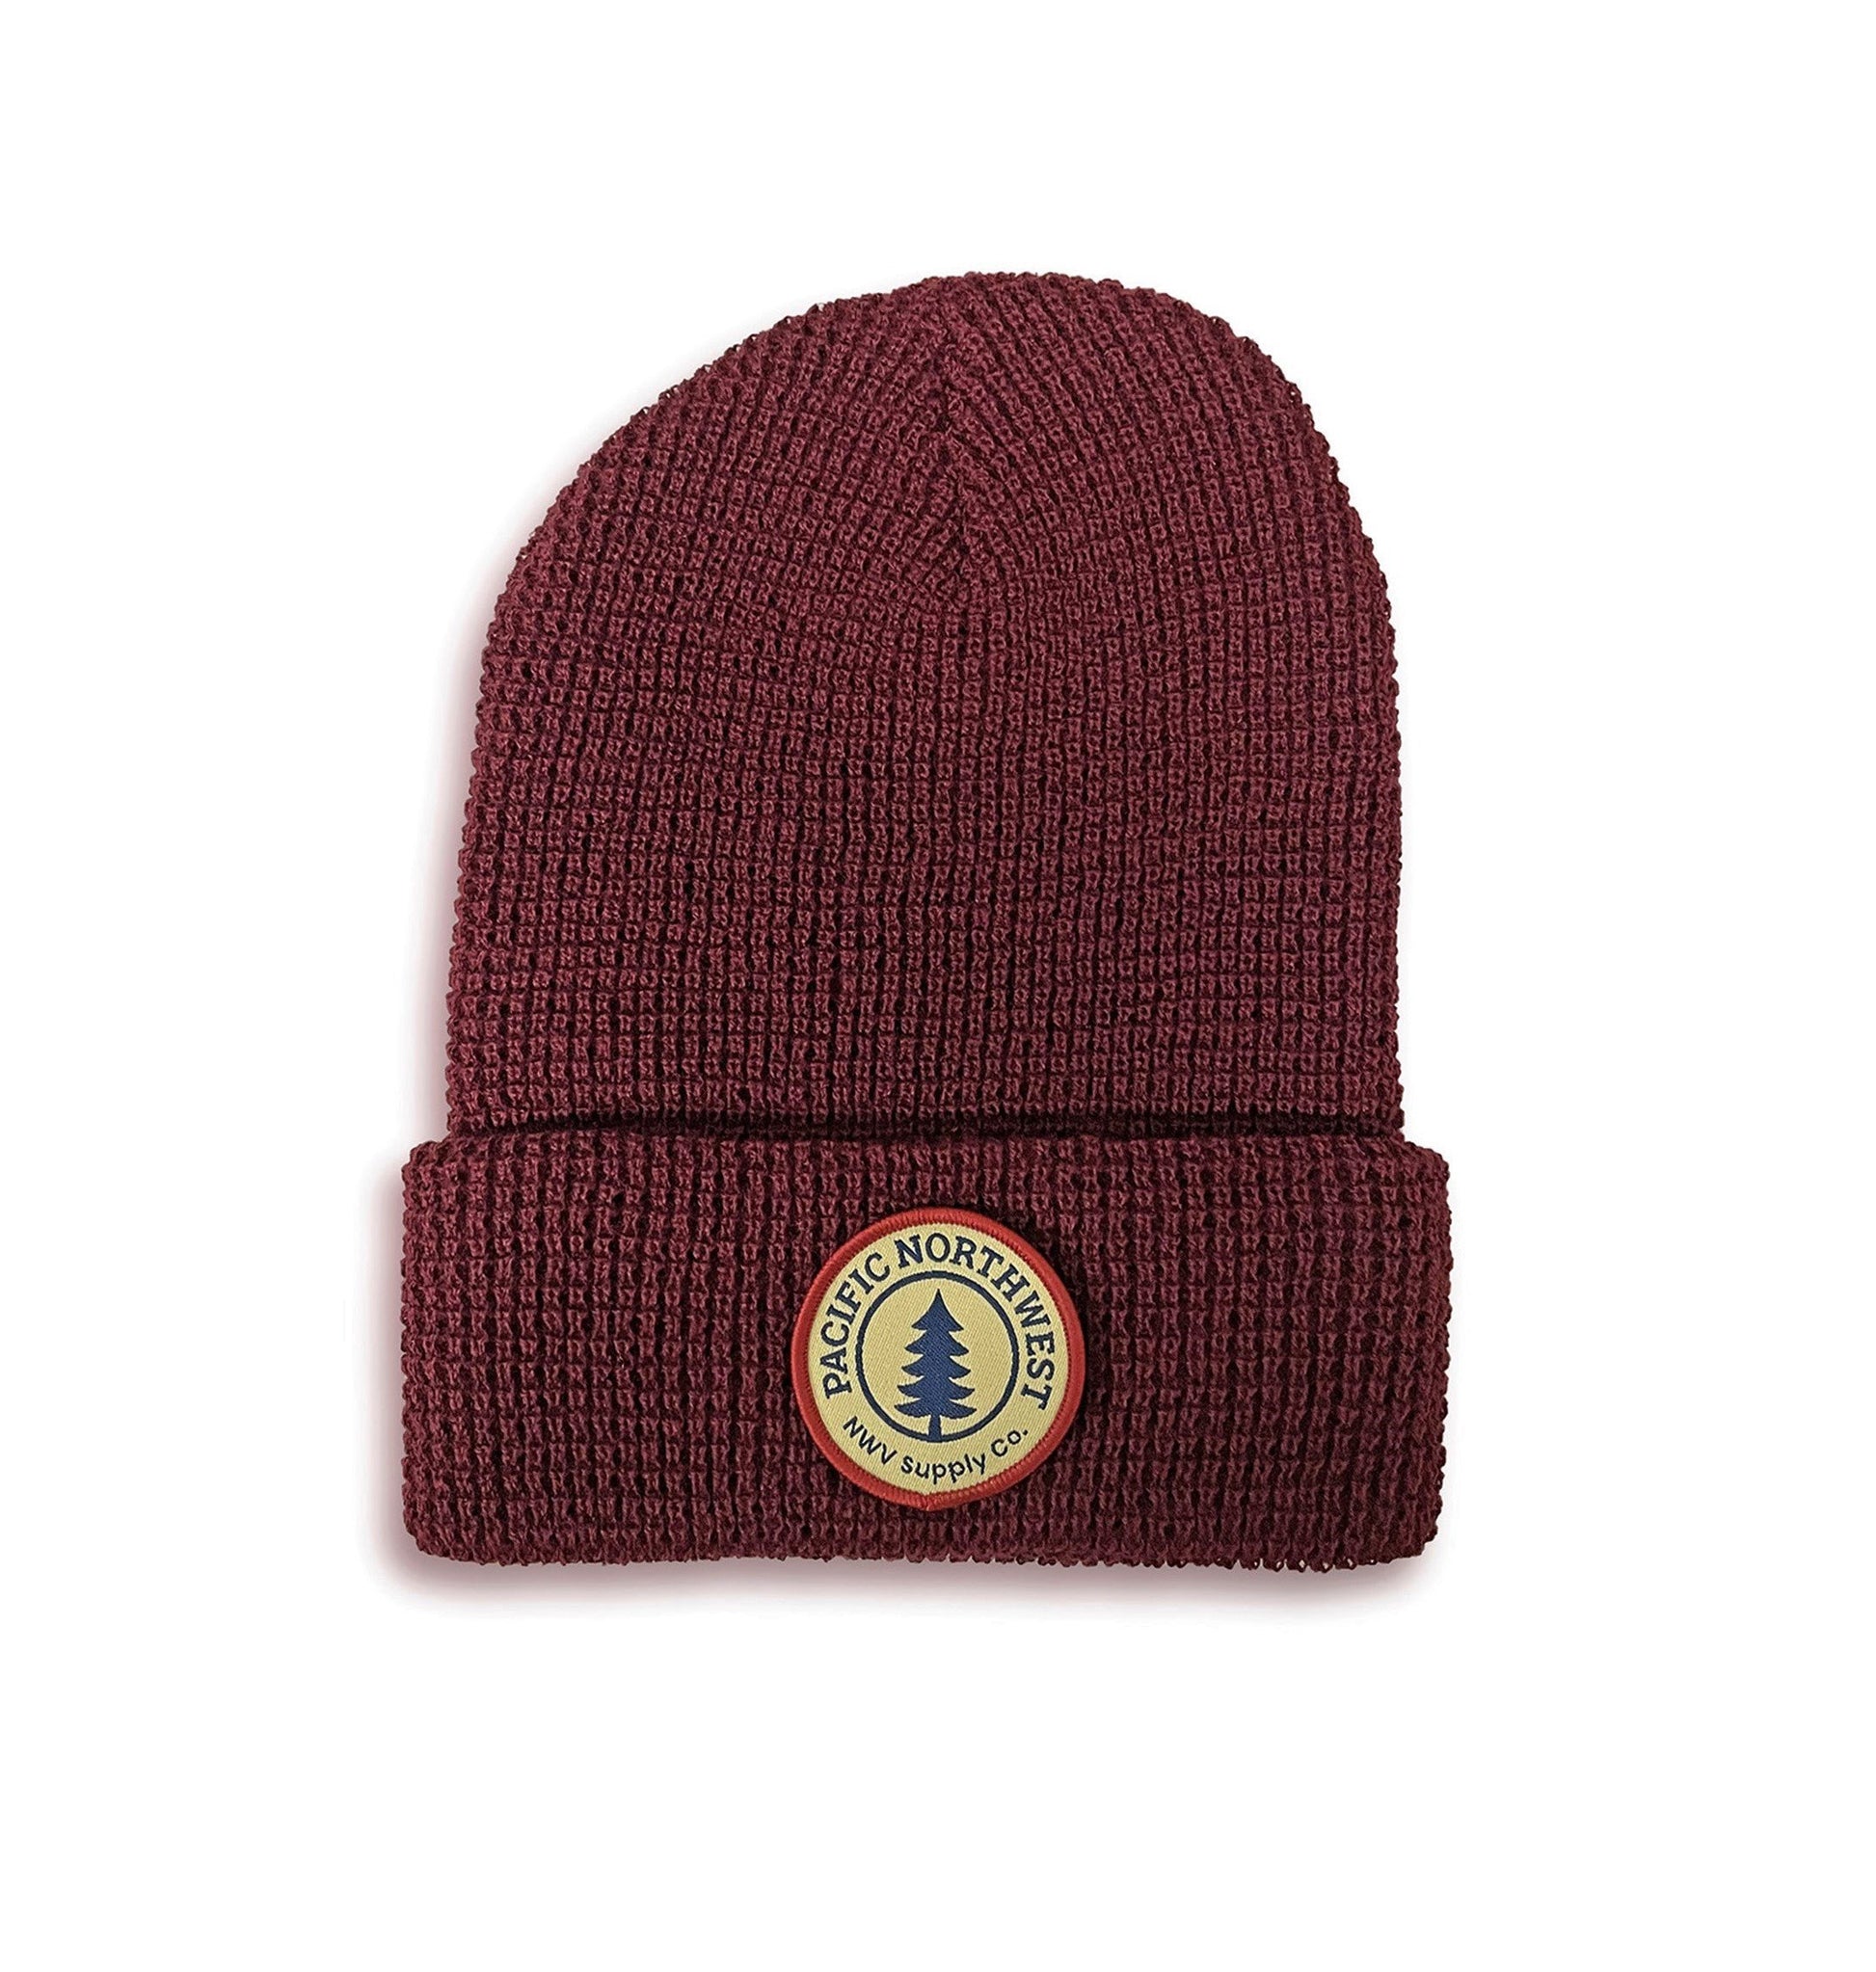 Maroon beanie with small patch featuring a tree and the text "Pacific Northwest"